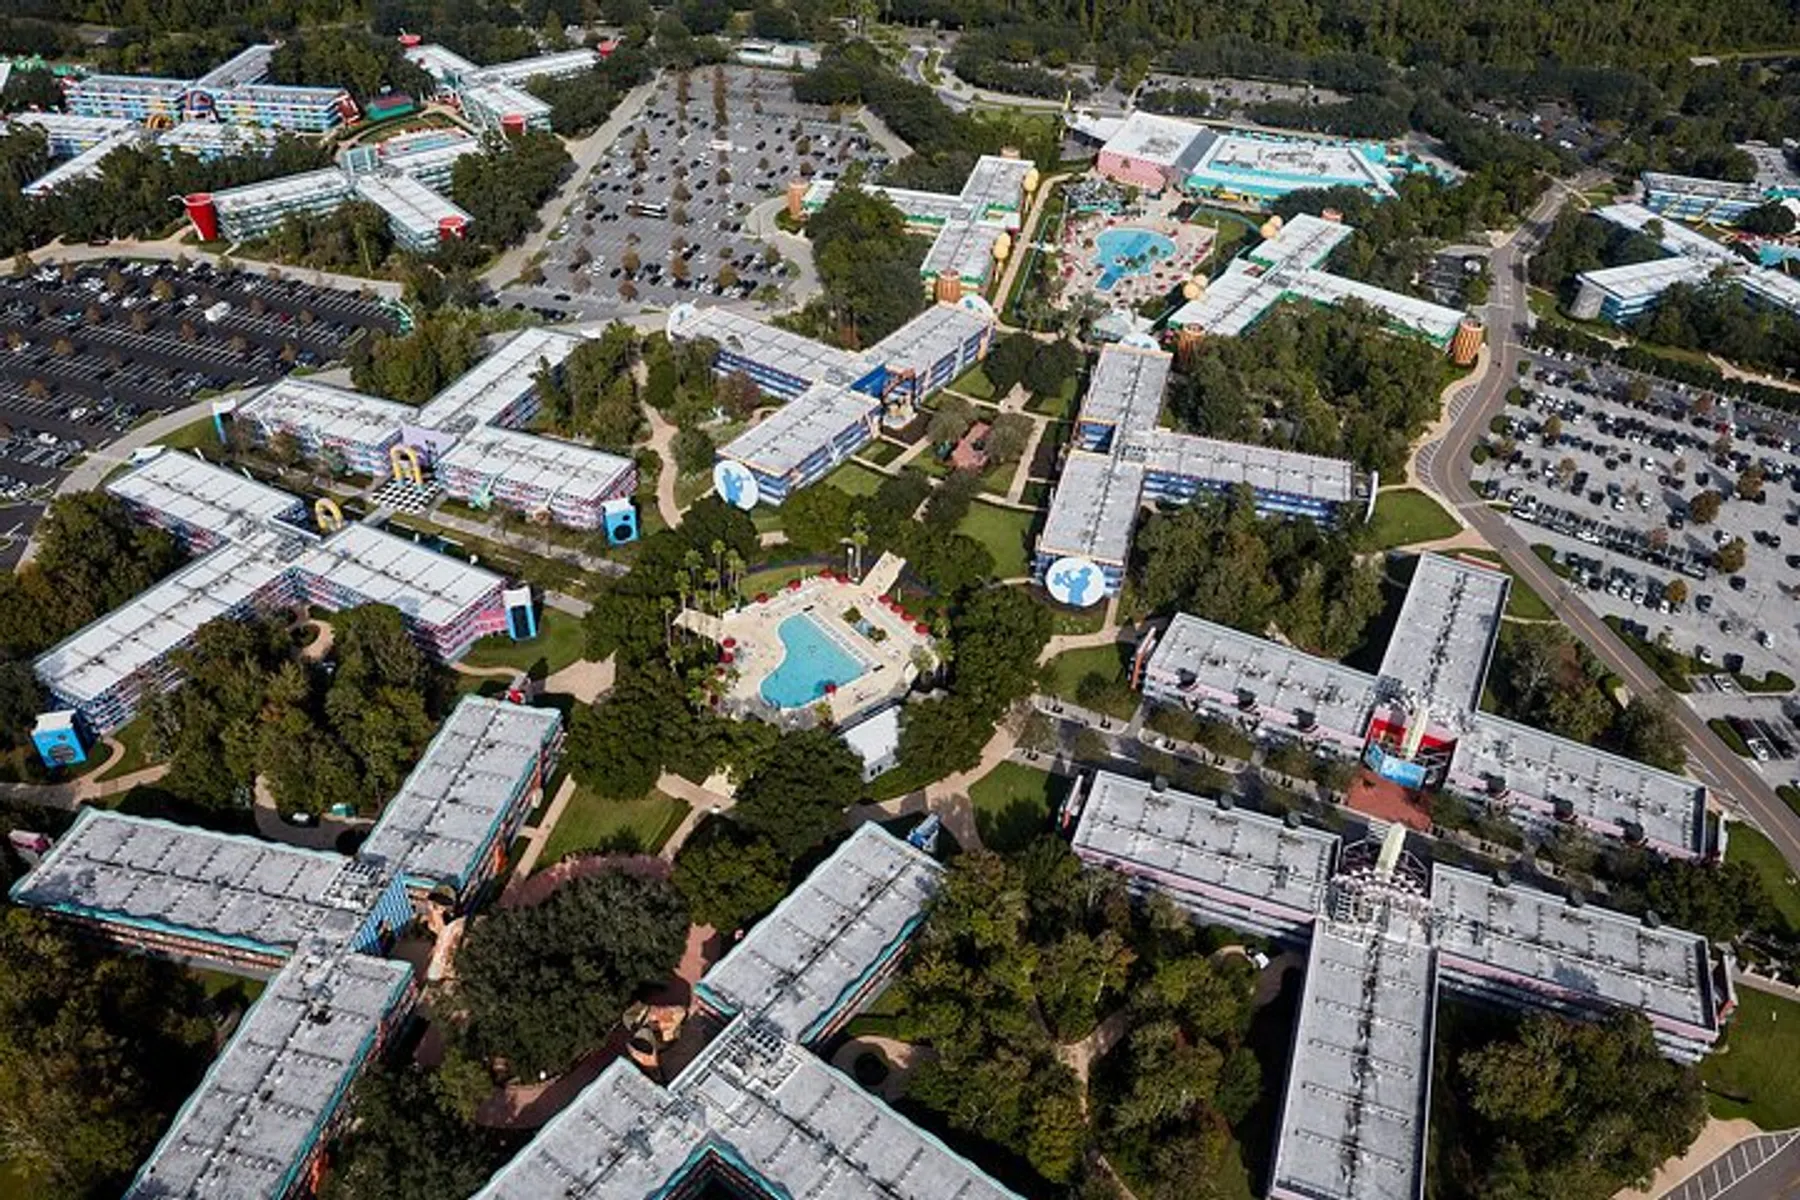 The image is an aerial view of a large resort complex featuring multiple buildings with colorful rooftops, swimming pools, and spacious parking areas amidst greenery.